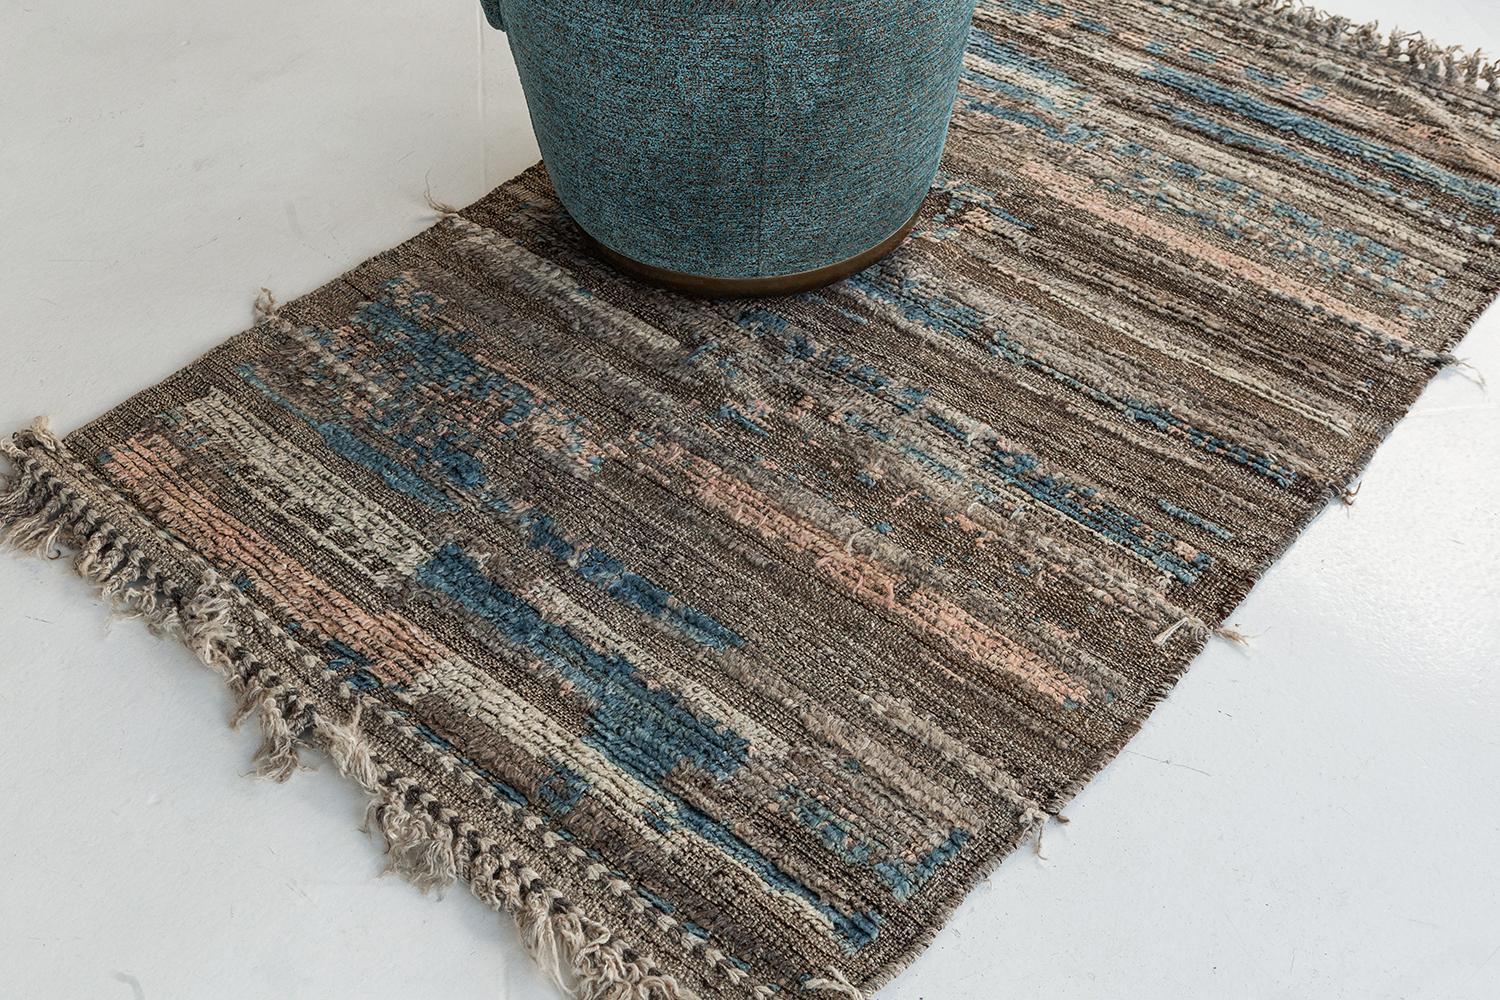 Malaren' is a luxurious wool rug with timeless embossed detailing. In addition to its perfect natural flat weave, Malaren has earthy tone shags that bring a lustrous texture and contemporary feel to one's space. With its plush pile, functional